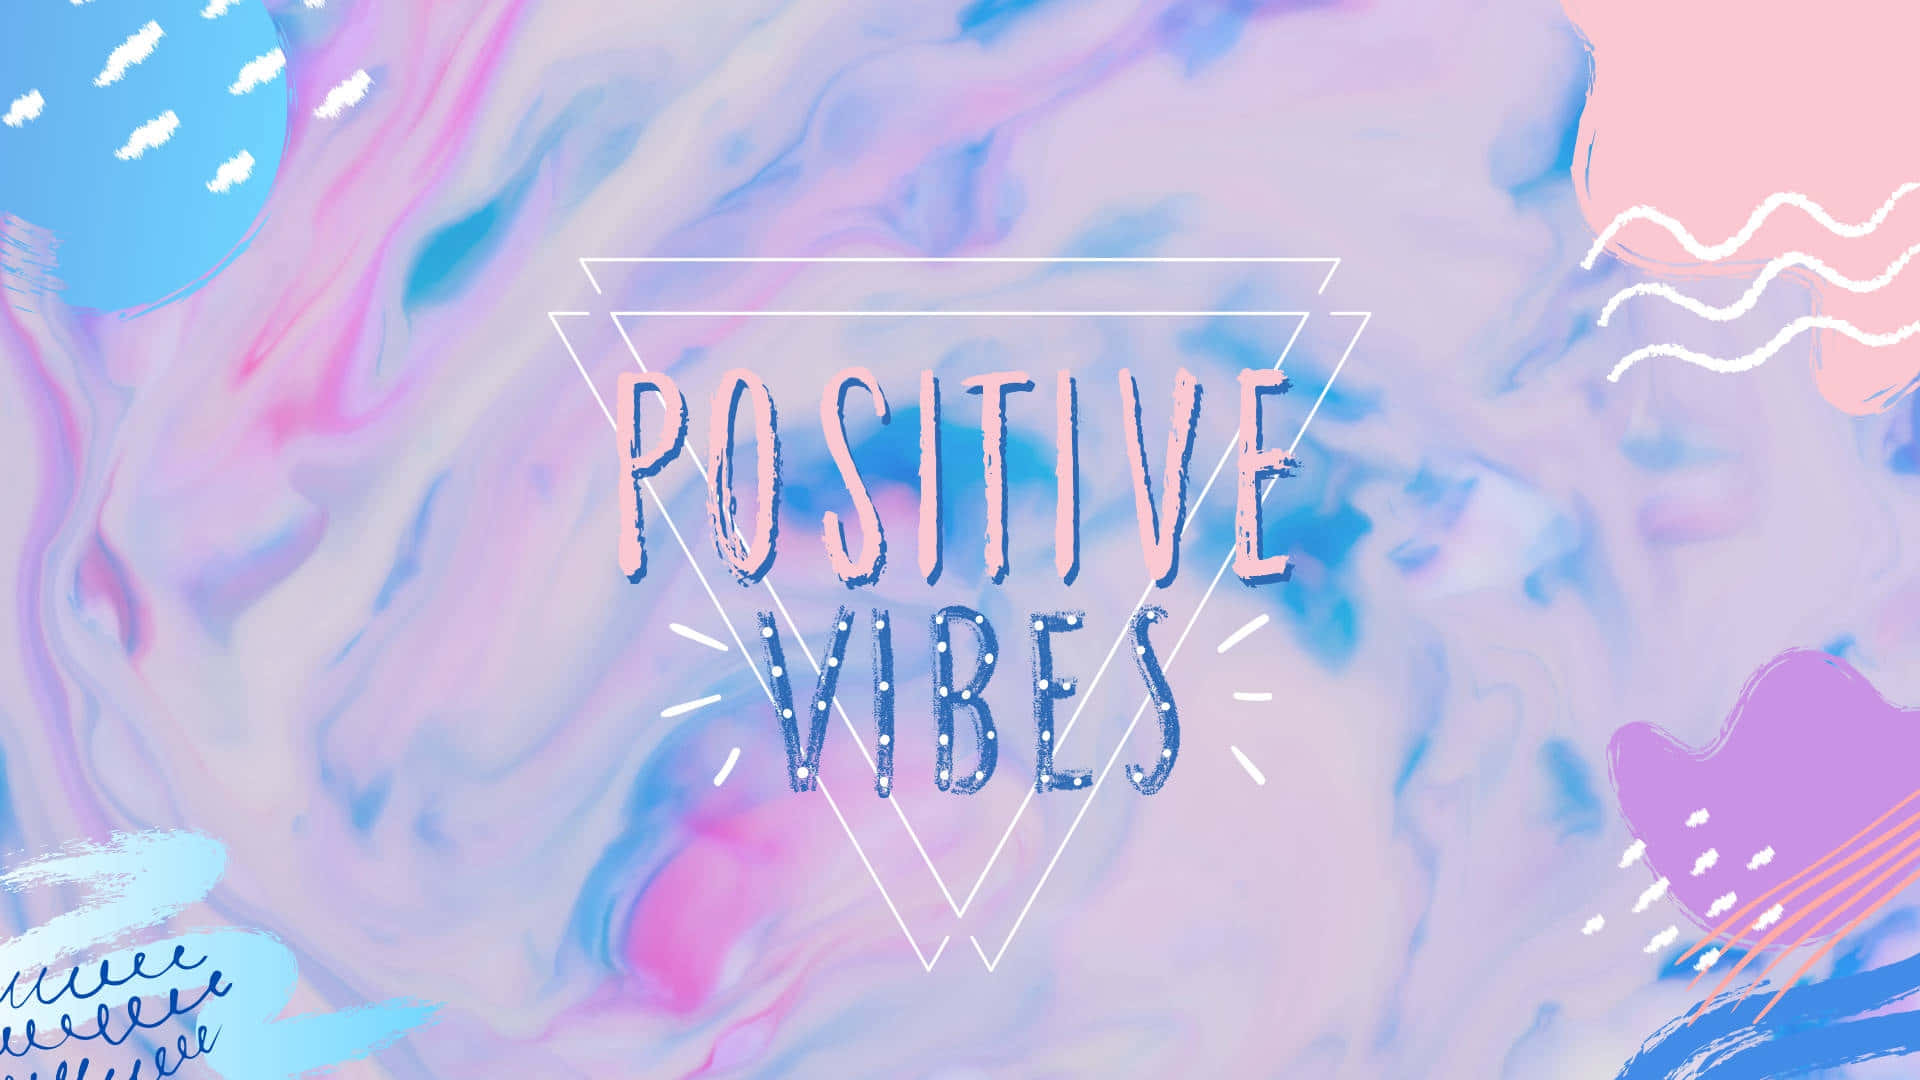 Positive Vibes Abstract Background Wallpaper